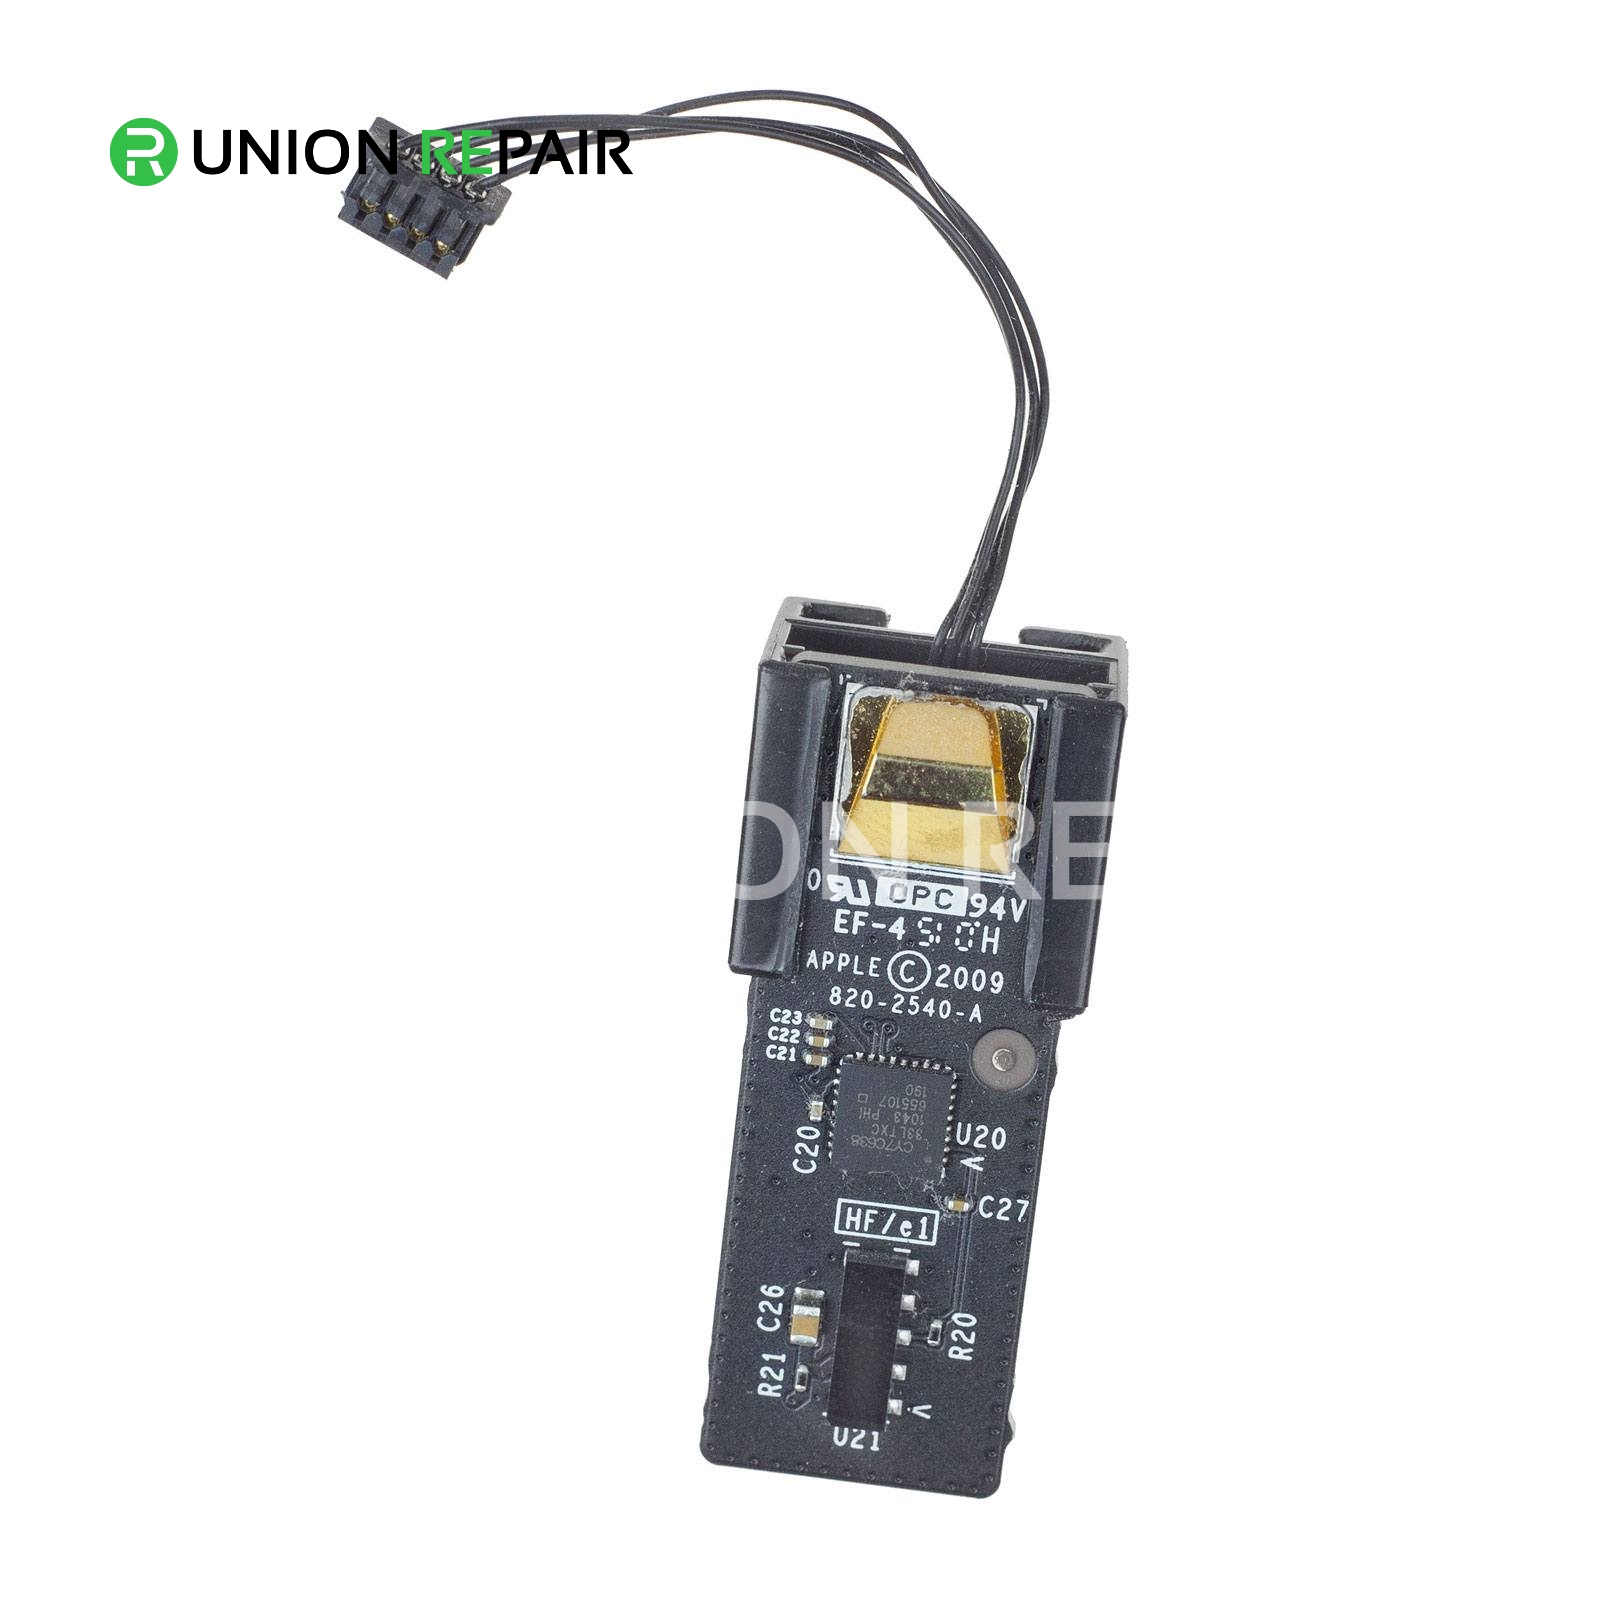 IR Board & Cable for iMac 21.5" A1311 (Late 2009 - Late 2011)